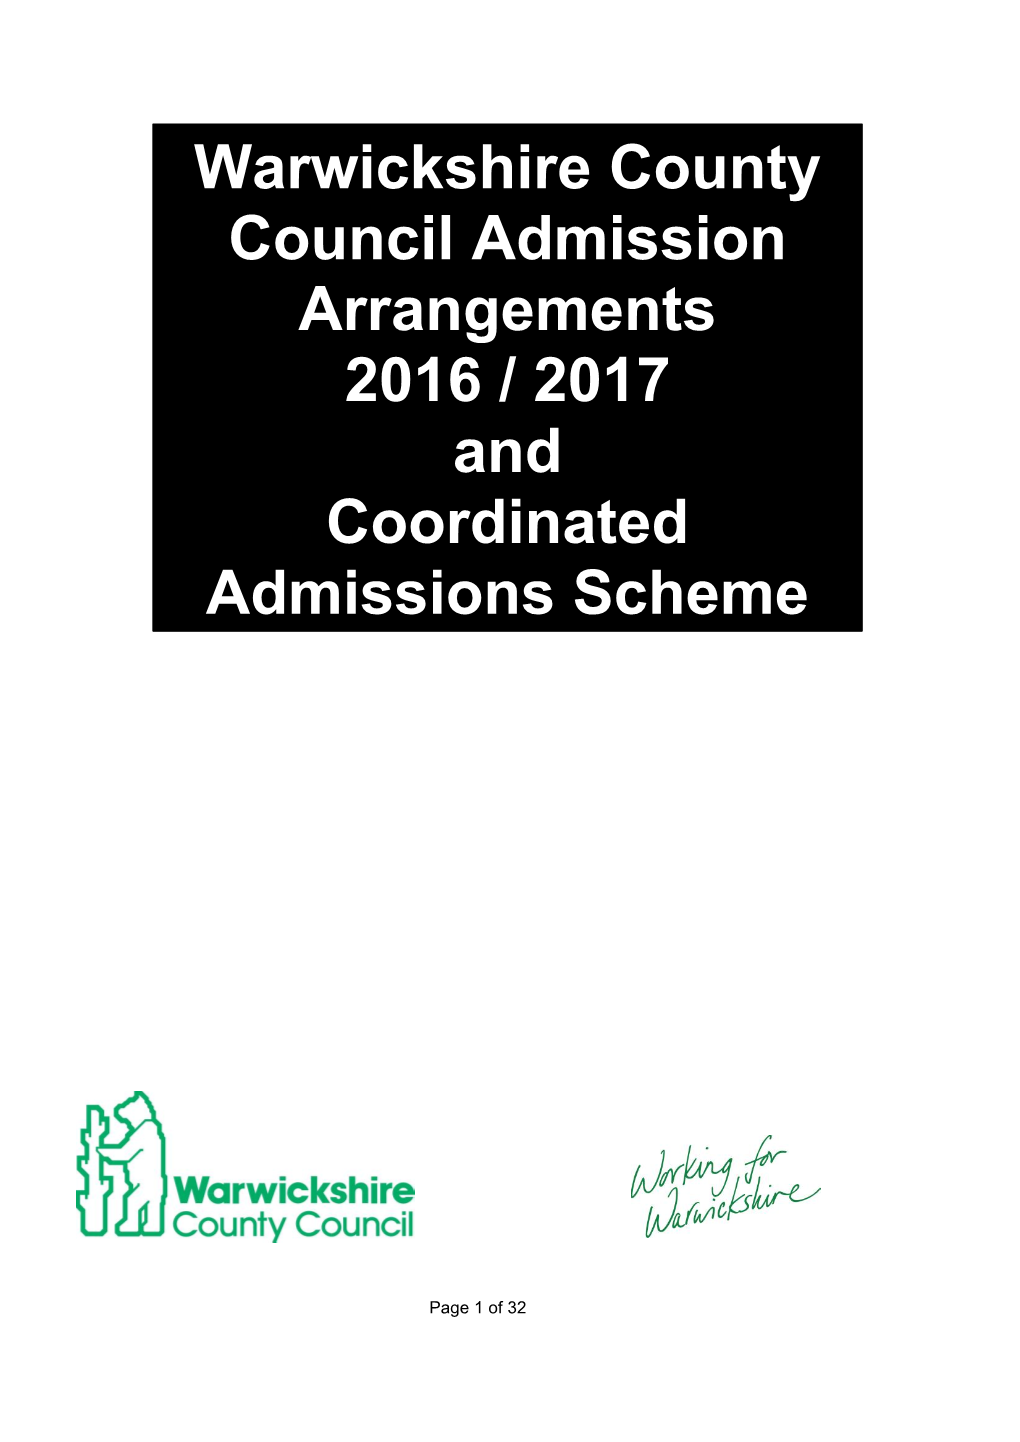 Warwickshire County Council Admission Arrangements 2016 / 2017 and Coordinated